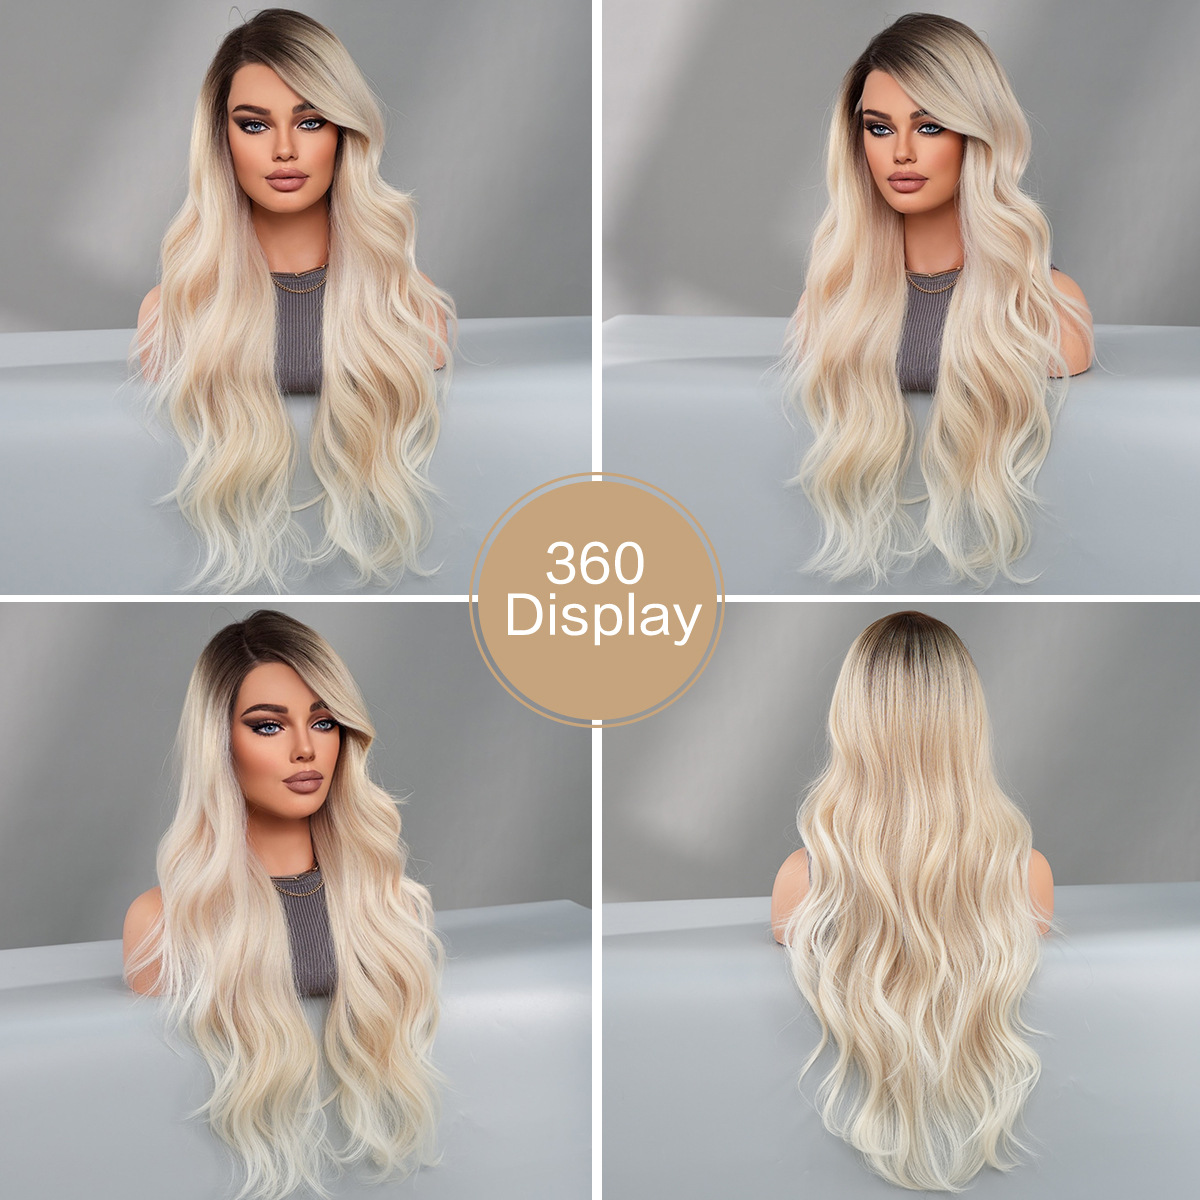 mage of a women's synthetic wig featuring side-parted large waves in a champagne gold gradient, with T lace construction